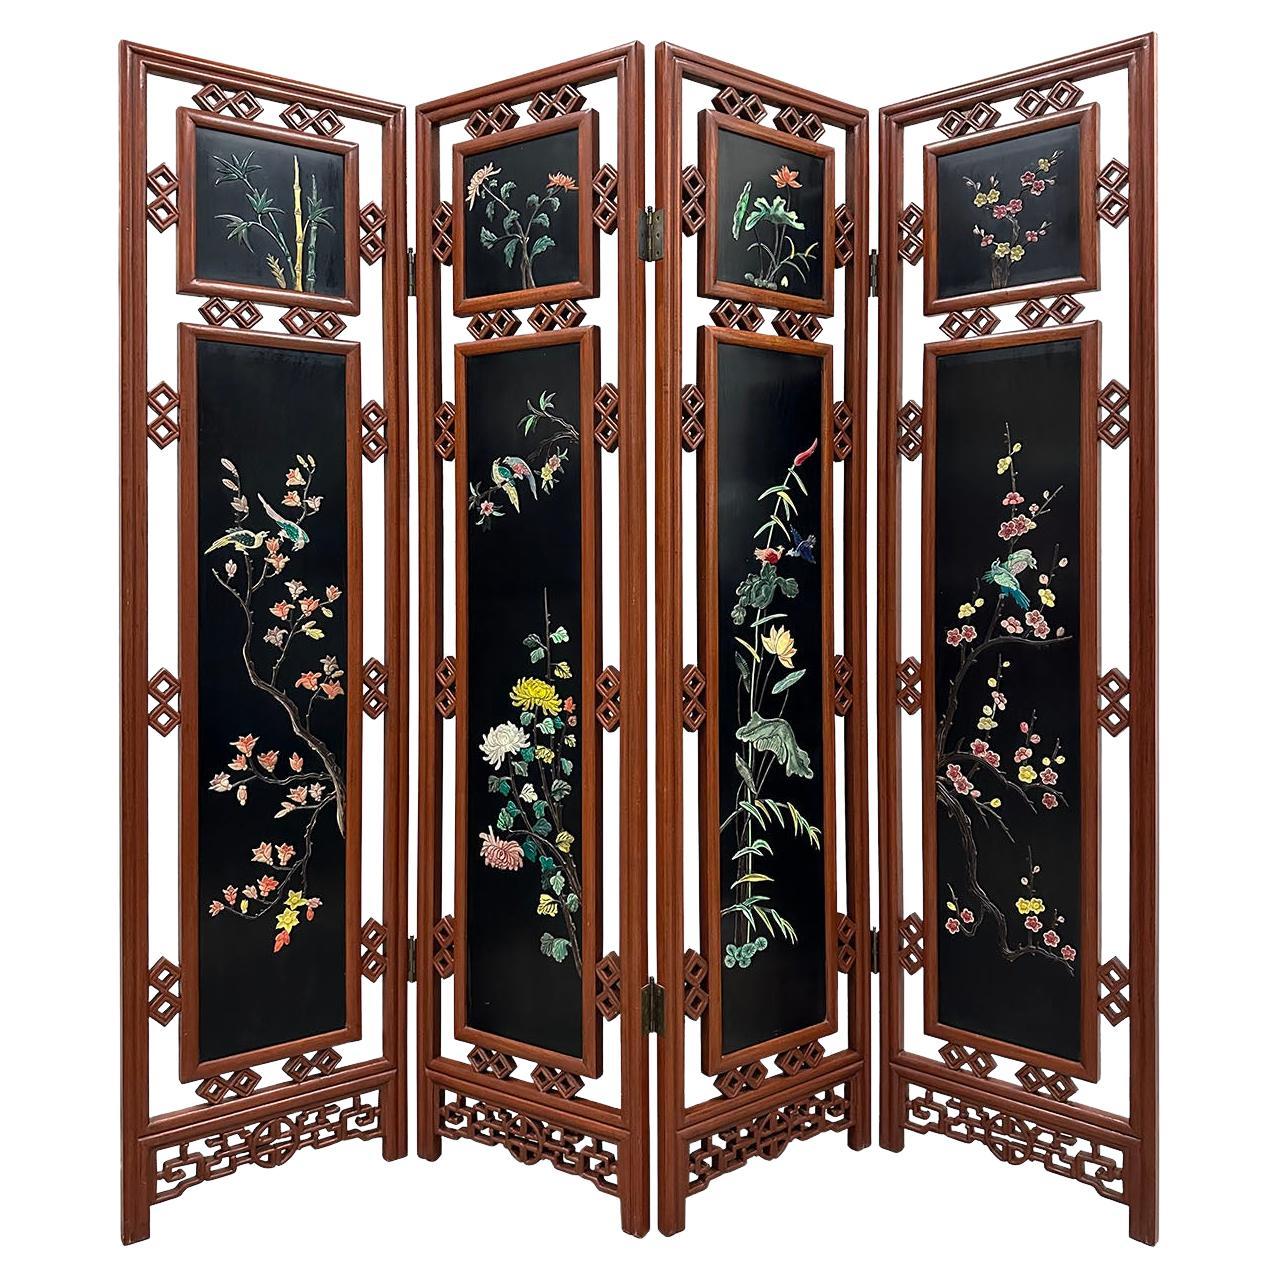 Mid-20th Century Chinese Hardwood Folding Screen/Room Divider with Soapstone Inl For Sale